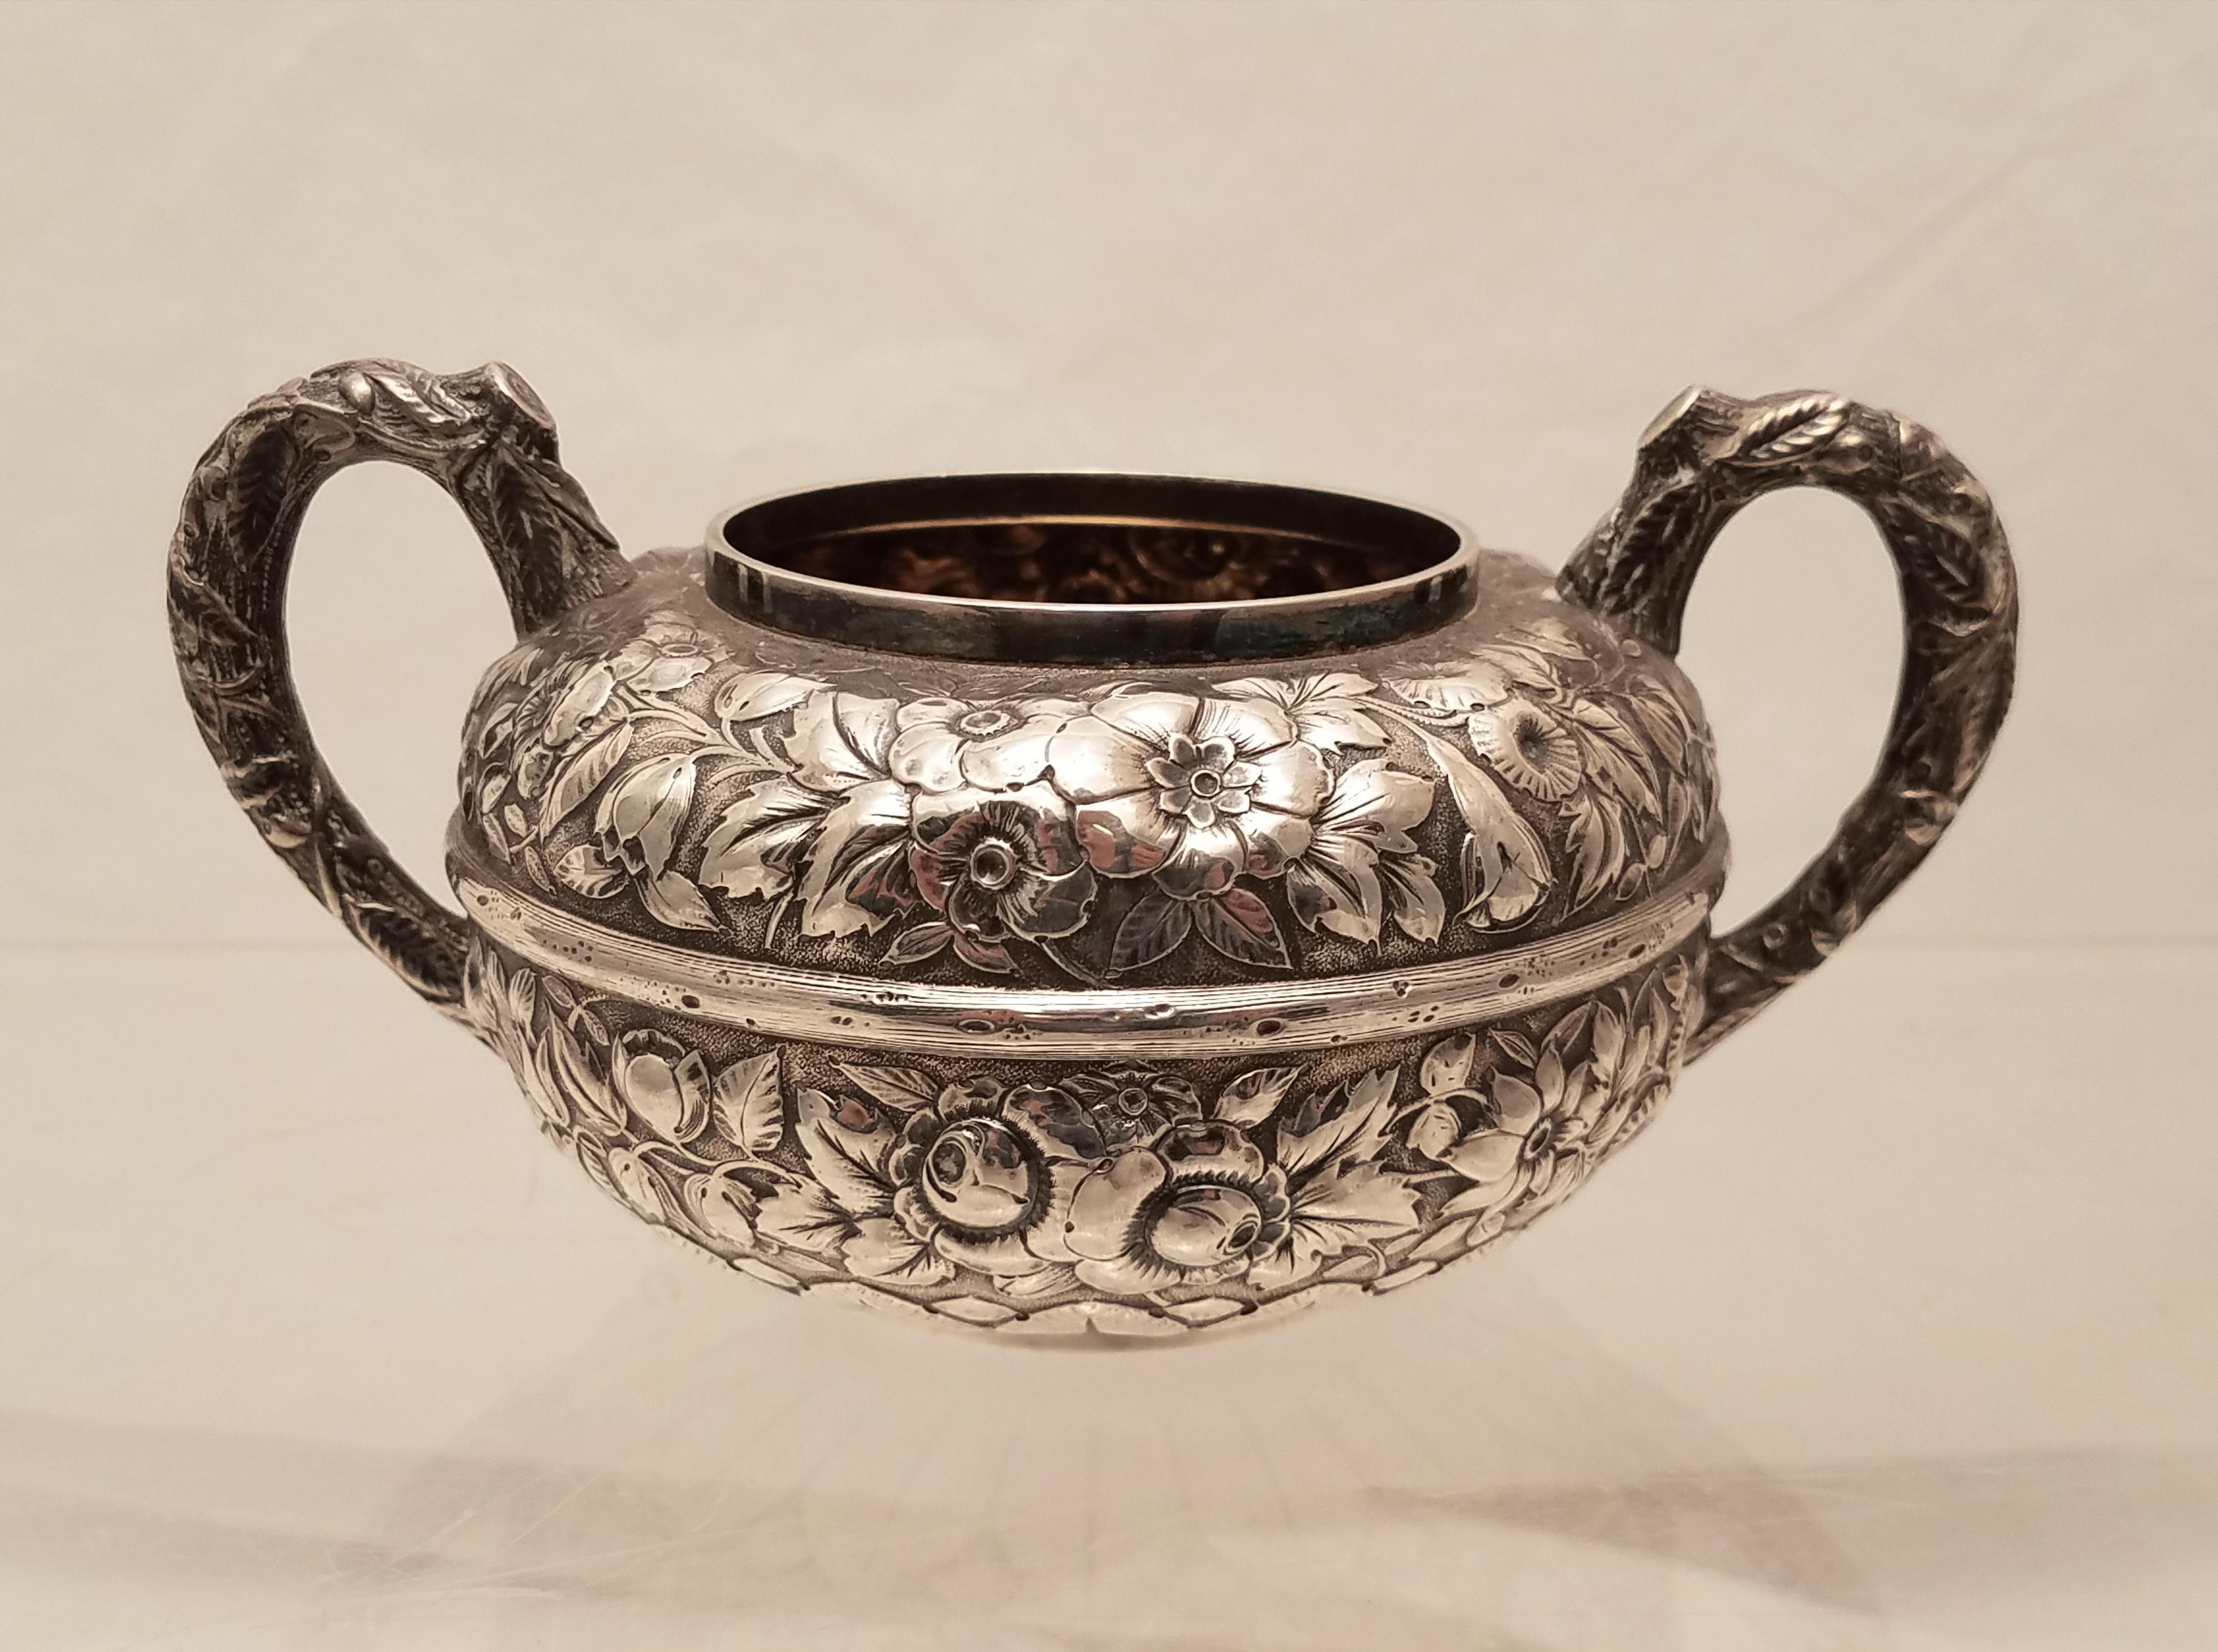 Gorham sterling silver open sugar and creamer in repousse design with handles from 1880. Open sugar measures 5.9 inches wide and 2.8 inches tall. Creamer measures 4.9 inches tall and 2.1 inches tall. Total weight 11.9 troy ounces. Bearing hallmarks